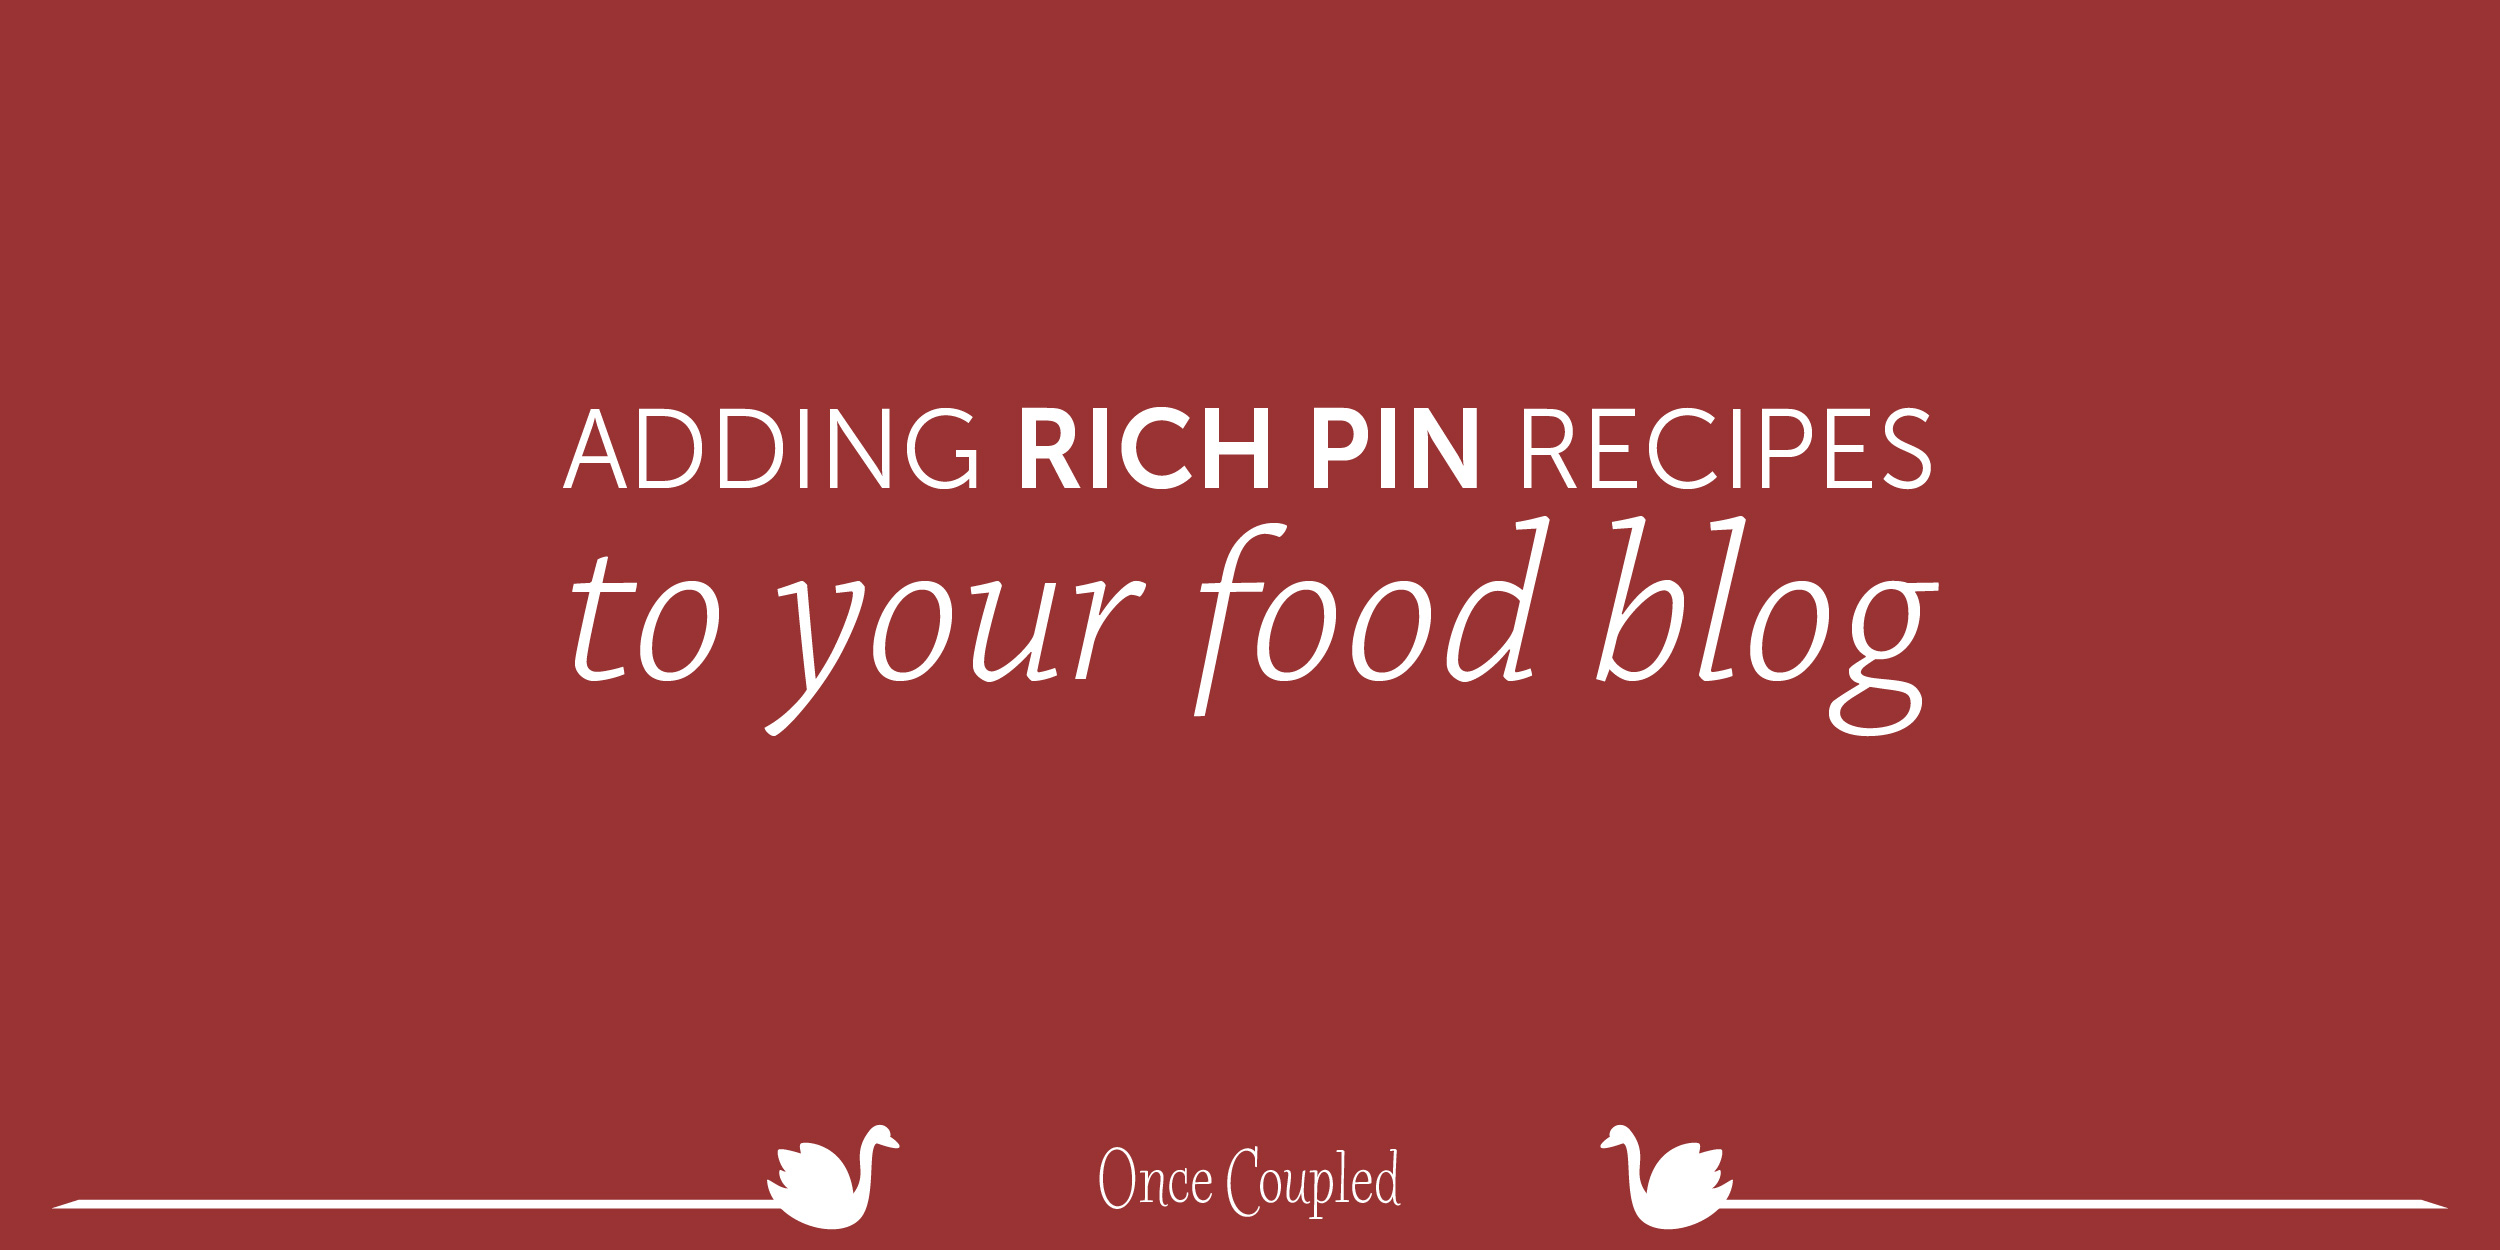 Adding Rich Recipe Pins to Your Food Blog